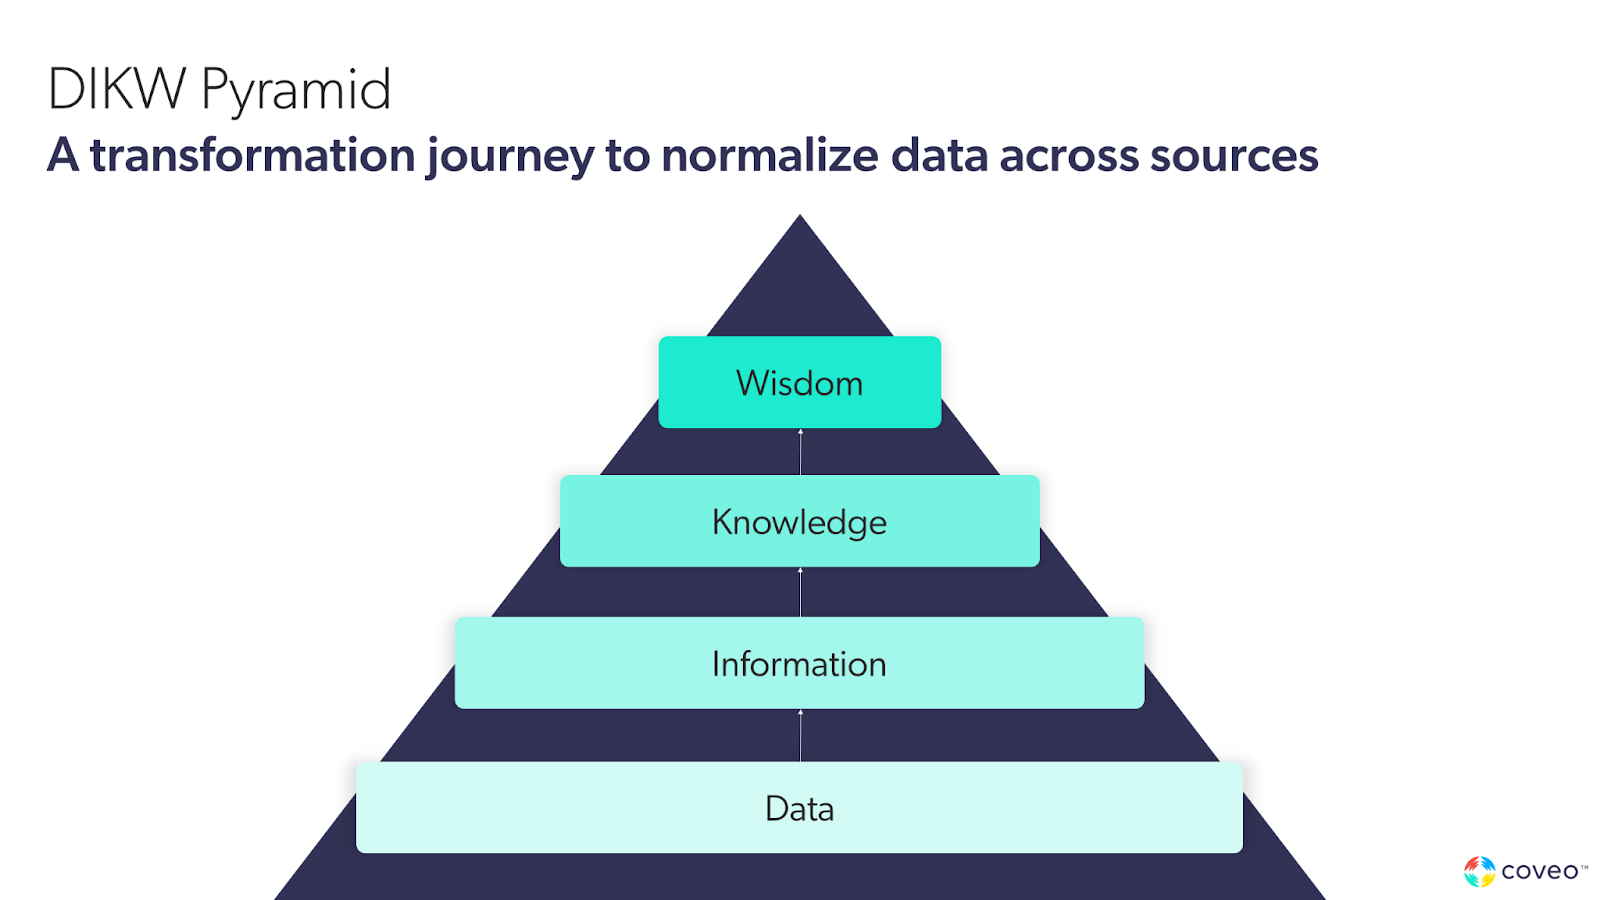 A graphic illustrates the concept of a DIKW pyramid, or Data, Information, Knowledge, and Wisdom.